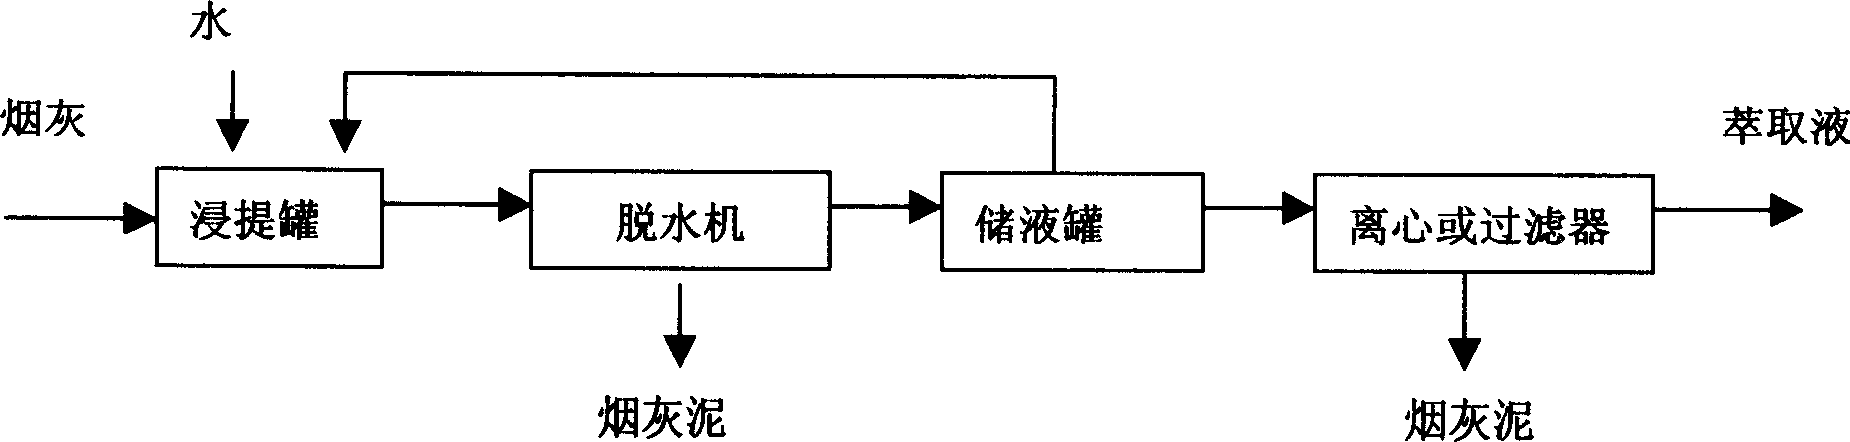 Method for using ash produced in cigarette production in tobacco reproduction (papermaking process)